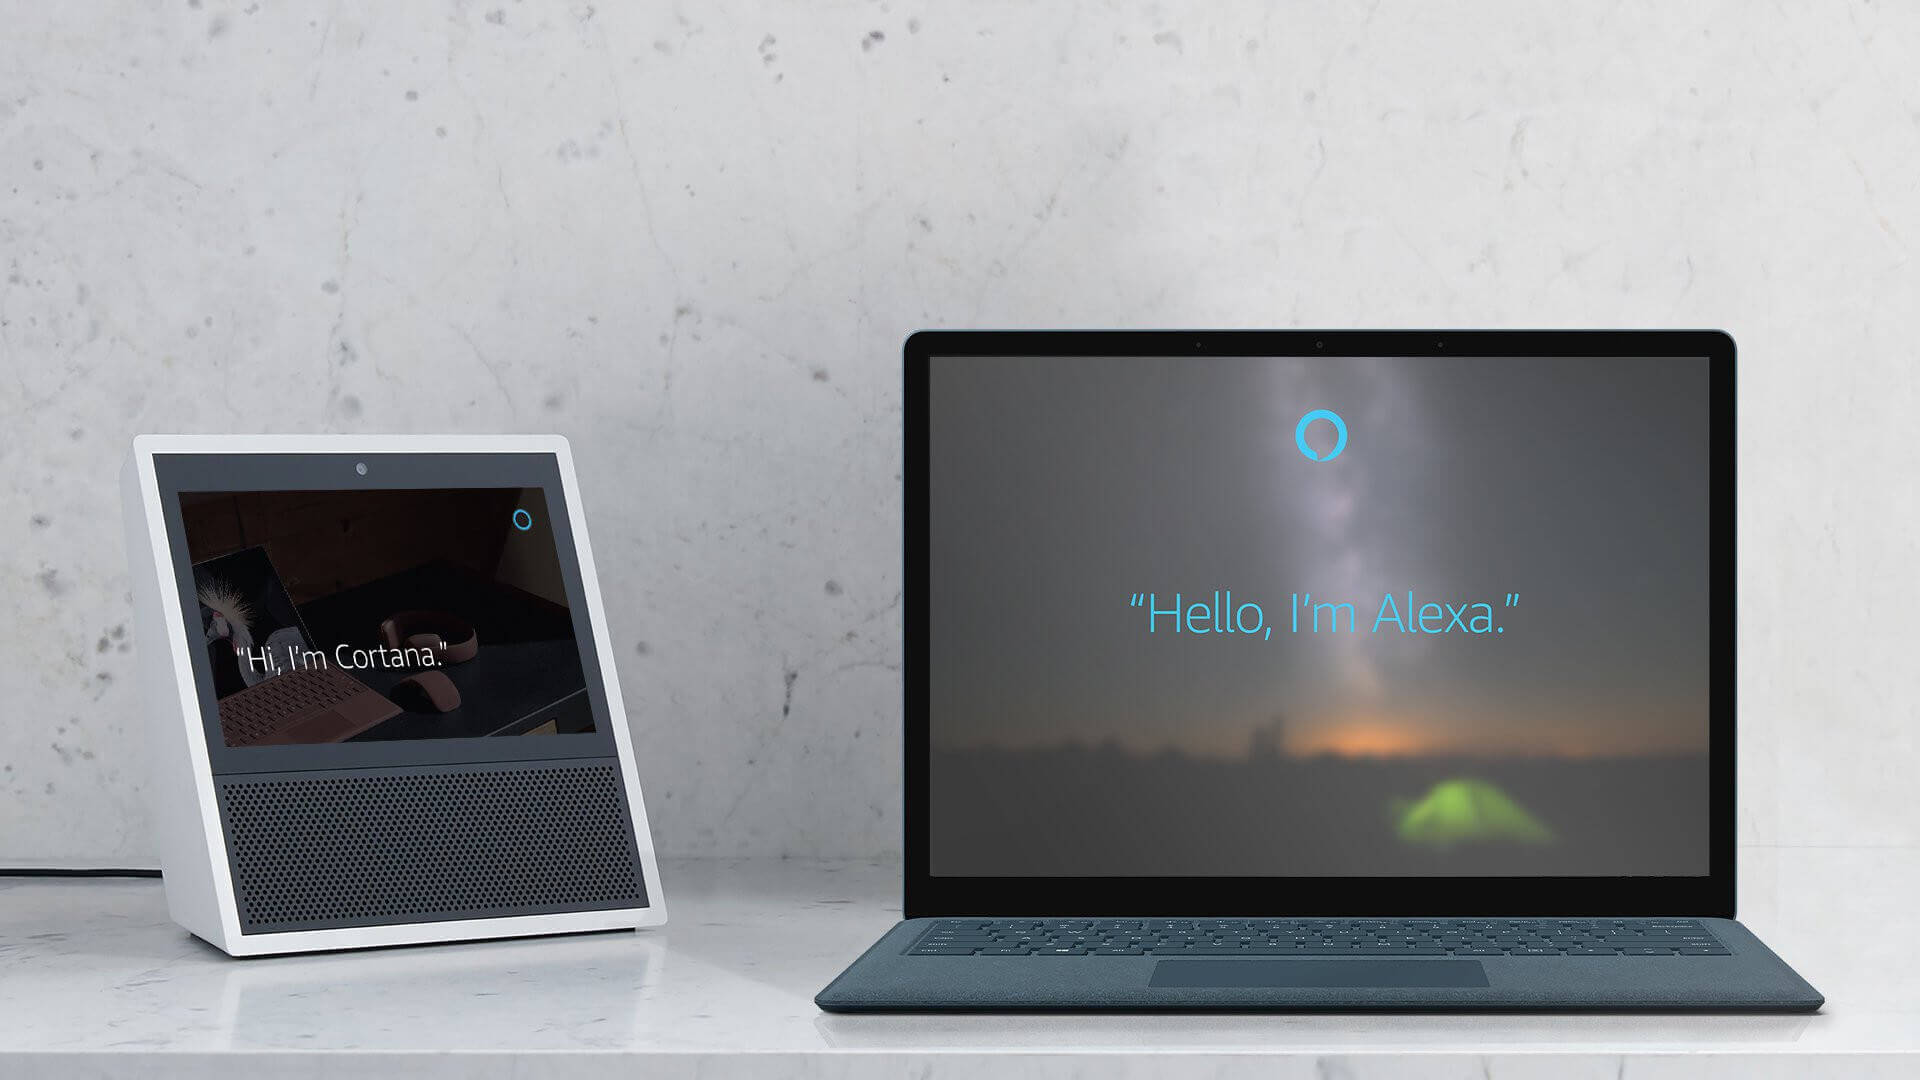 Microsoft's next Windows update will improve integration of third-party digital assistants